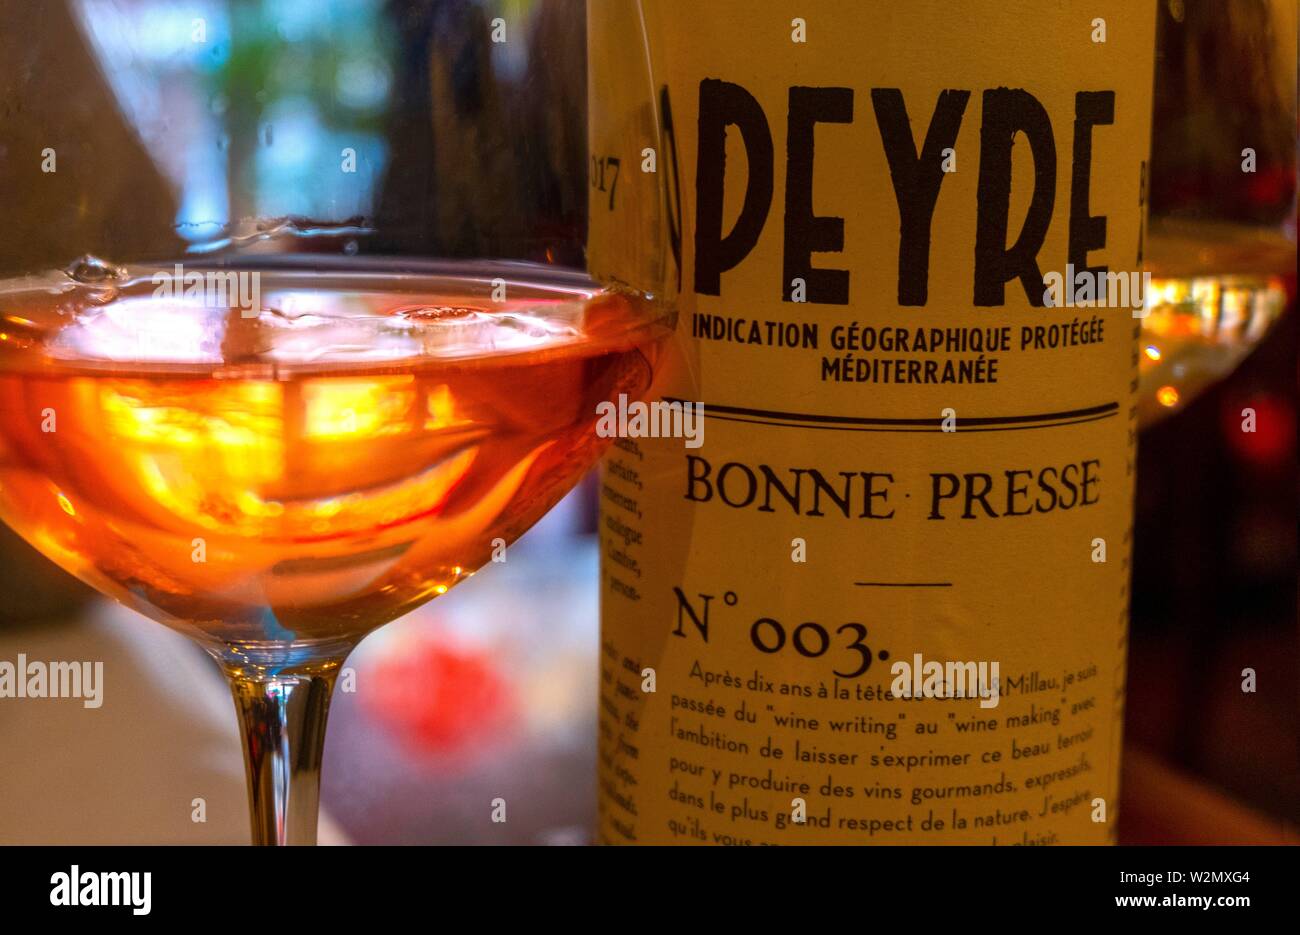 France, a IGP wine from a protected area.. Stock Photo